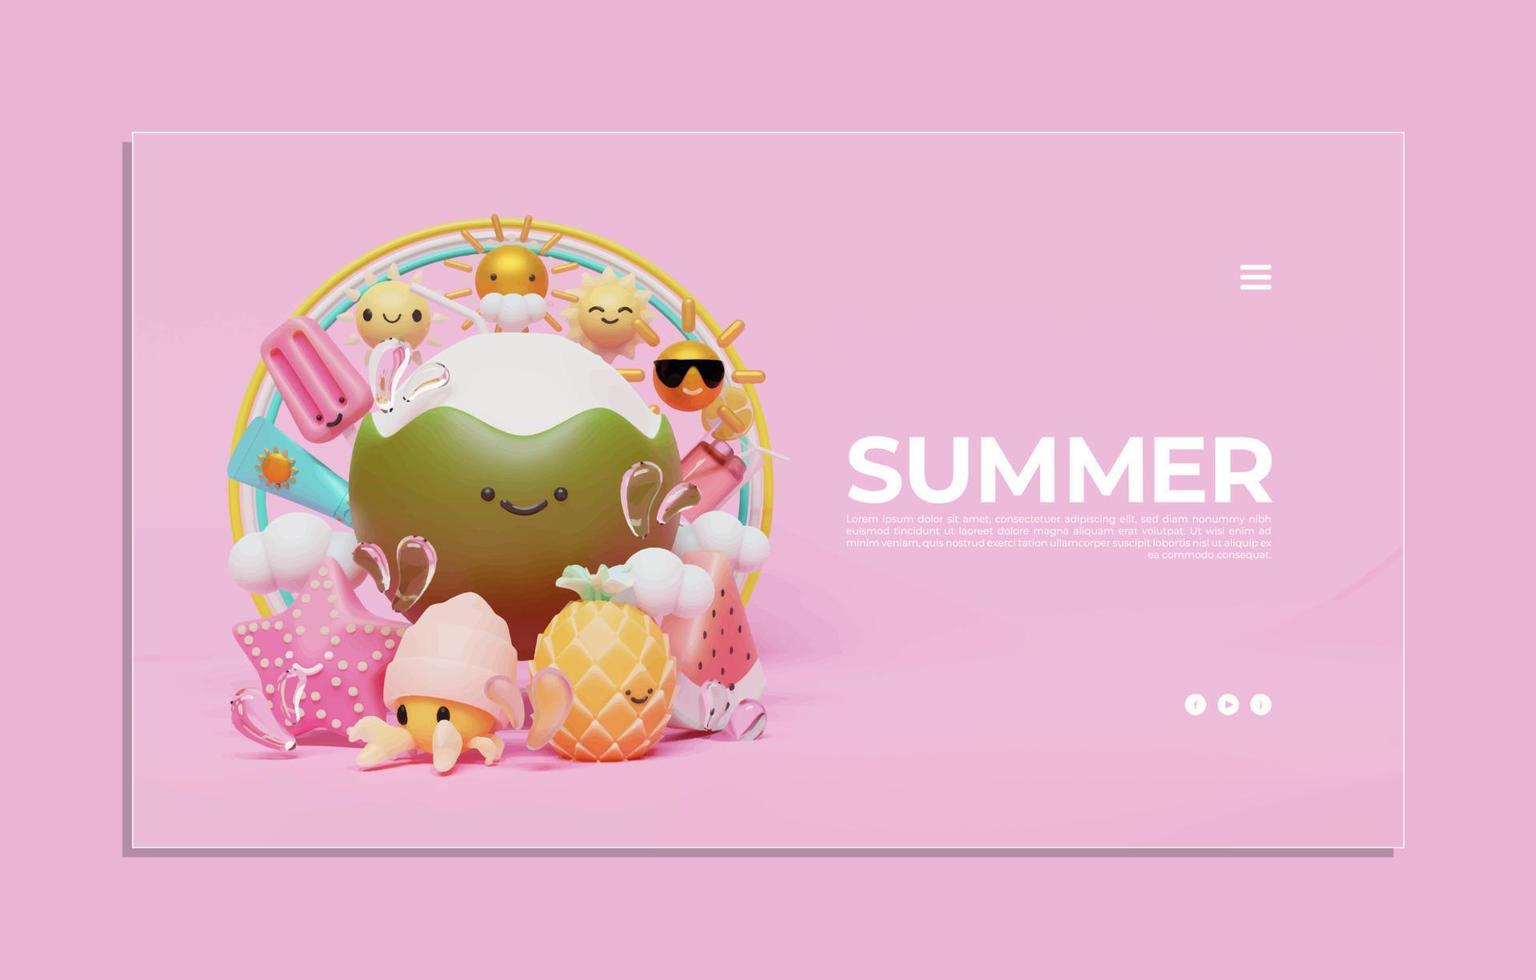 Summer Web Page Template With Coconut Illustration vector